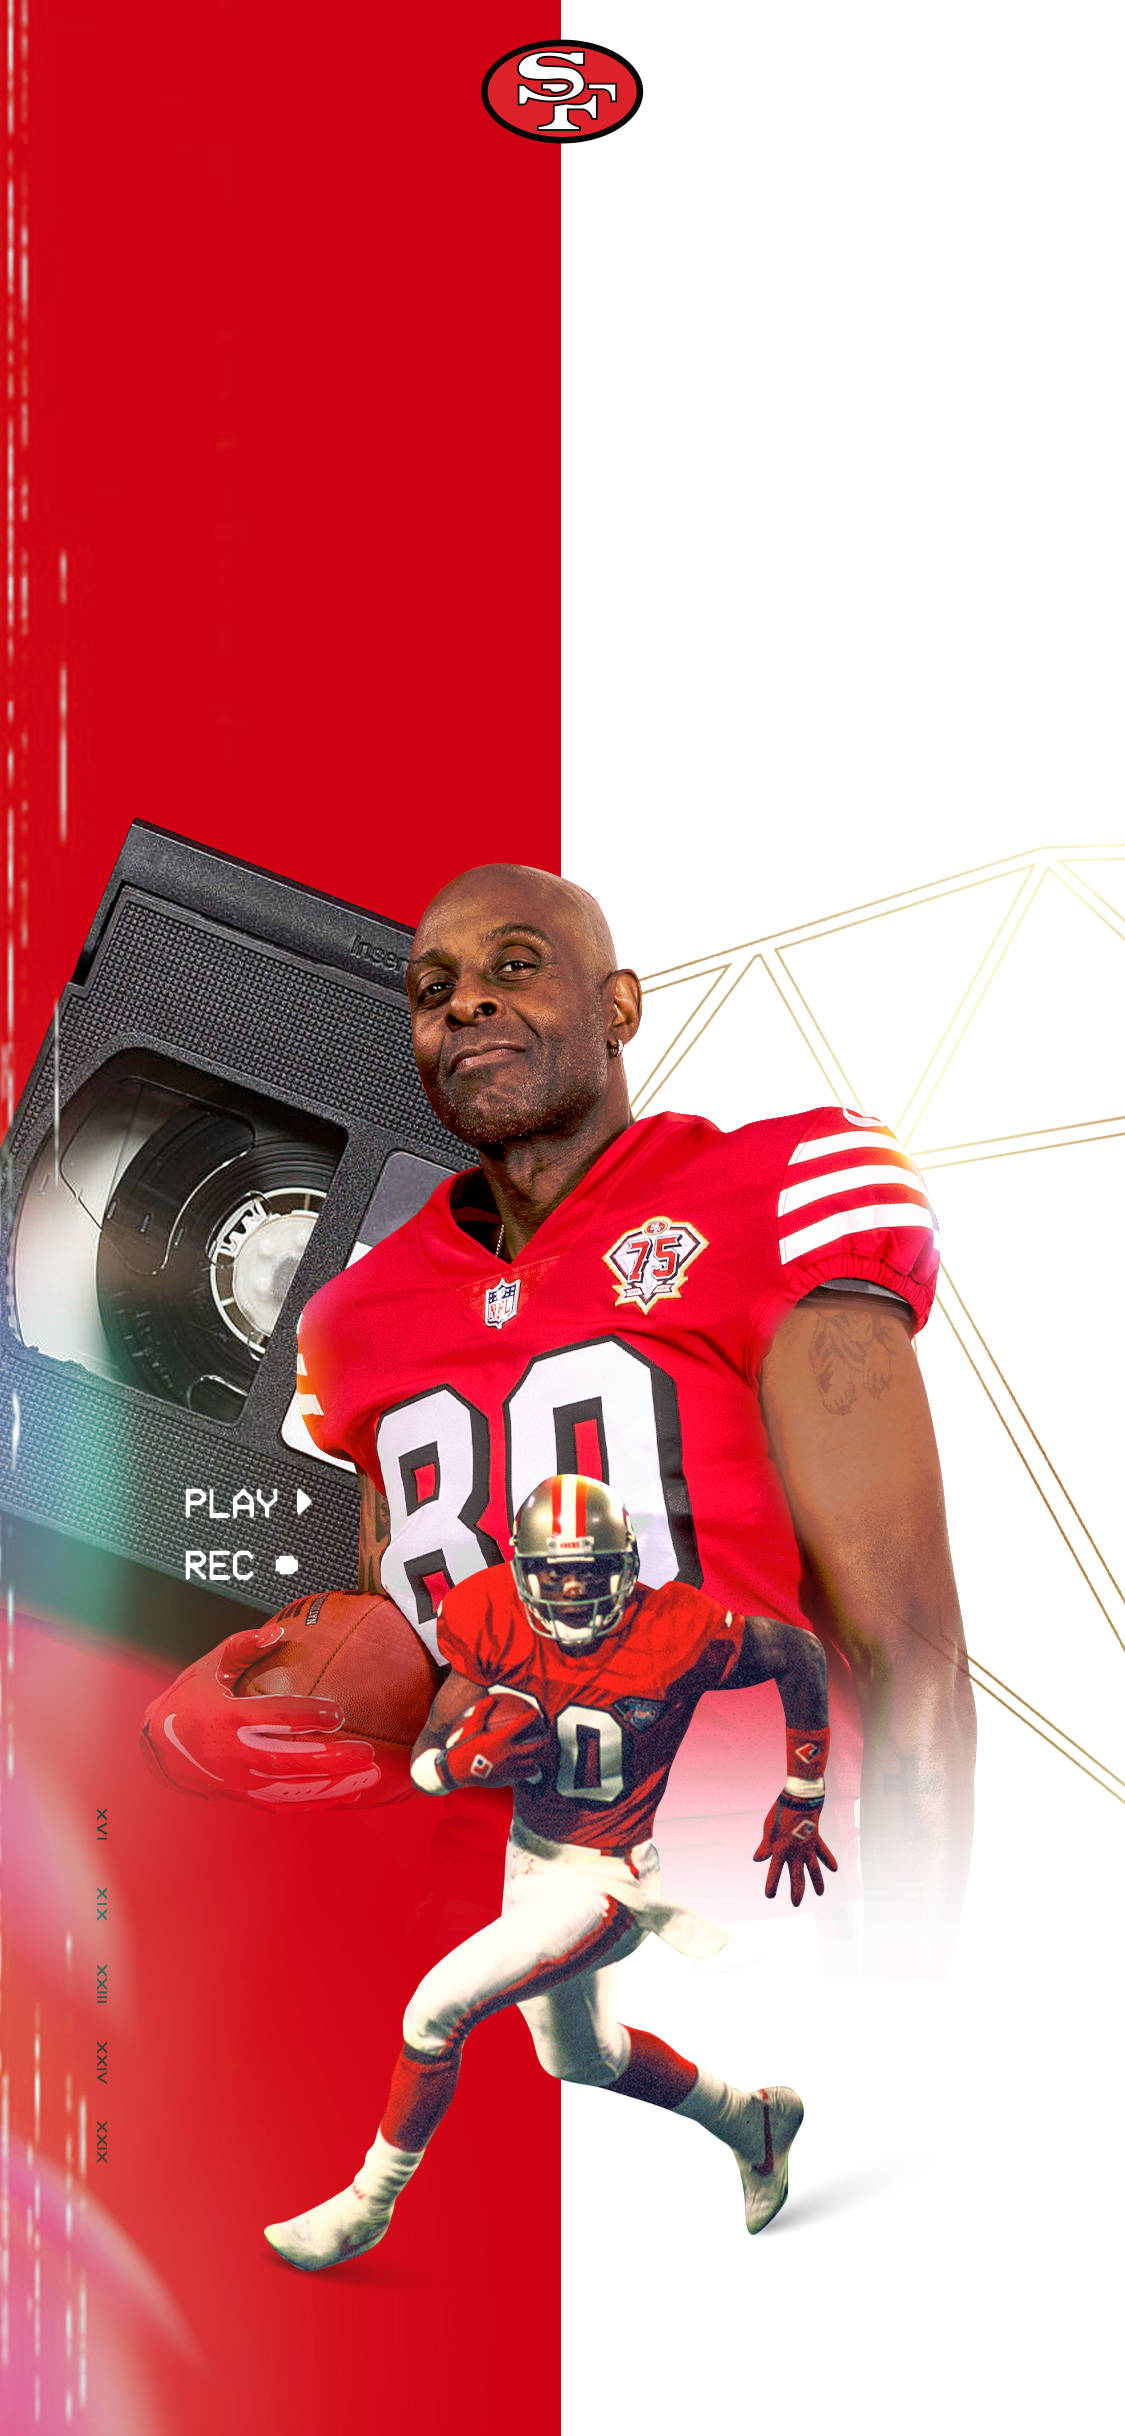 Aesthetic Jerry Rice 49ers Iphone Wallpaper